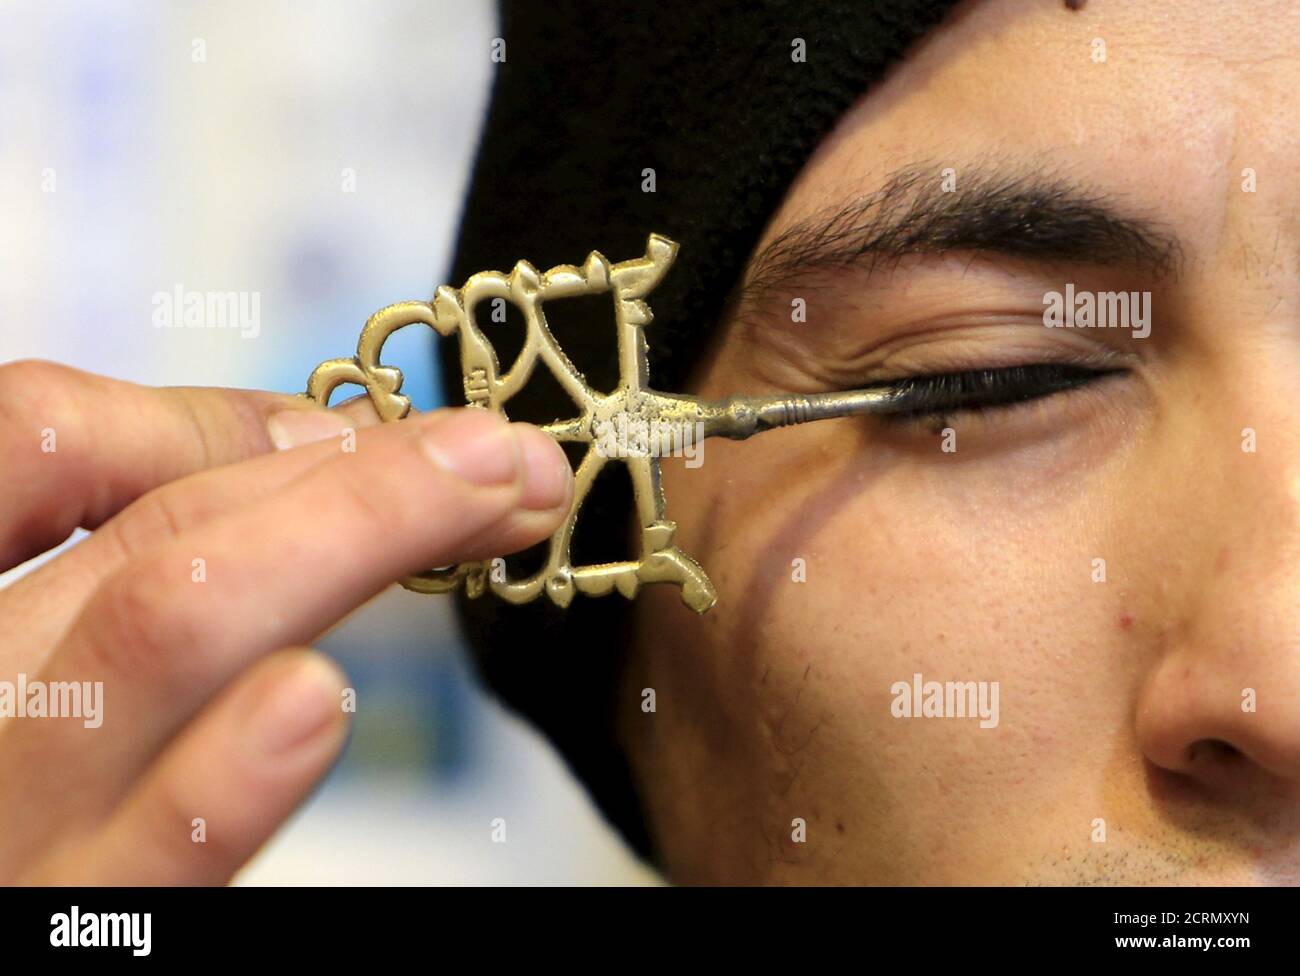 Nasser Abu al-Kal applies traditional kohl eyeliner in the port city of  Sidon, southern Lebanon January 19, 2016. Many Muslim men get their eyes  smeared with traditional Kohl eyeliner for religious reason.